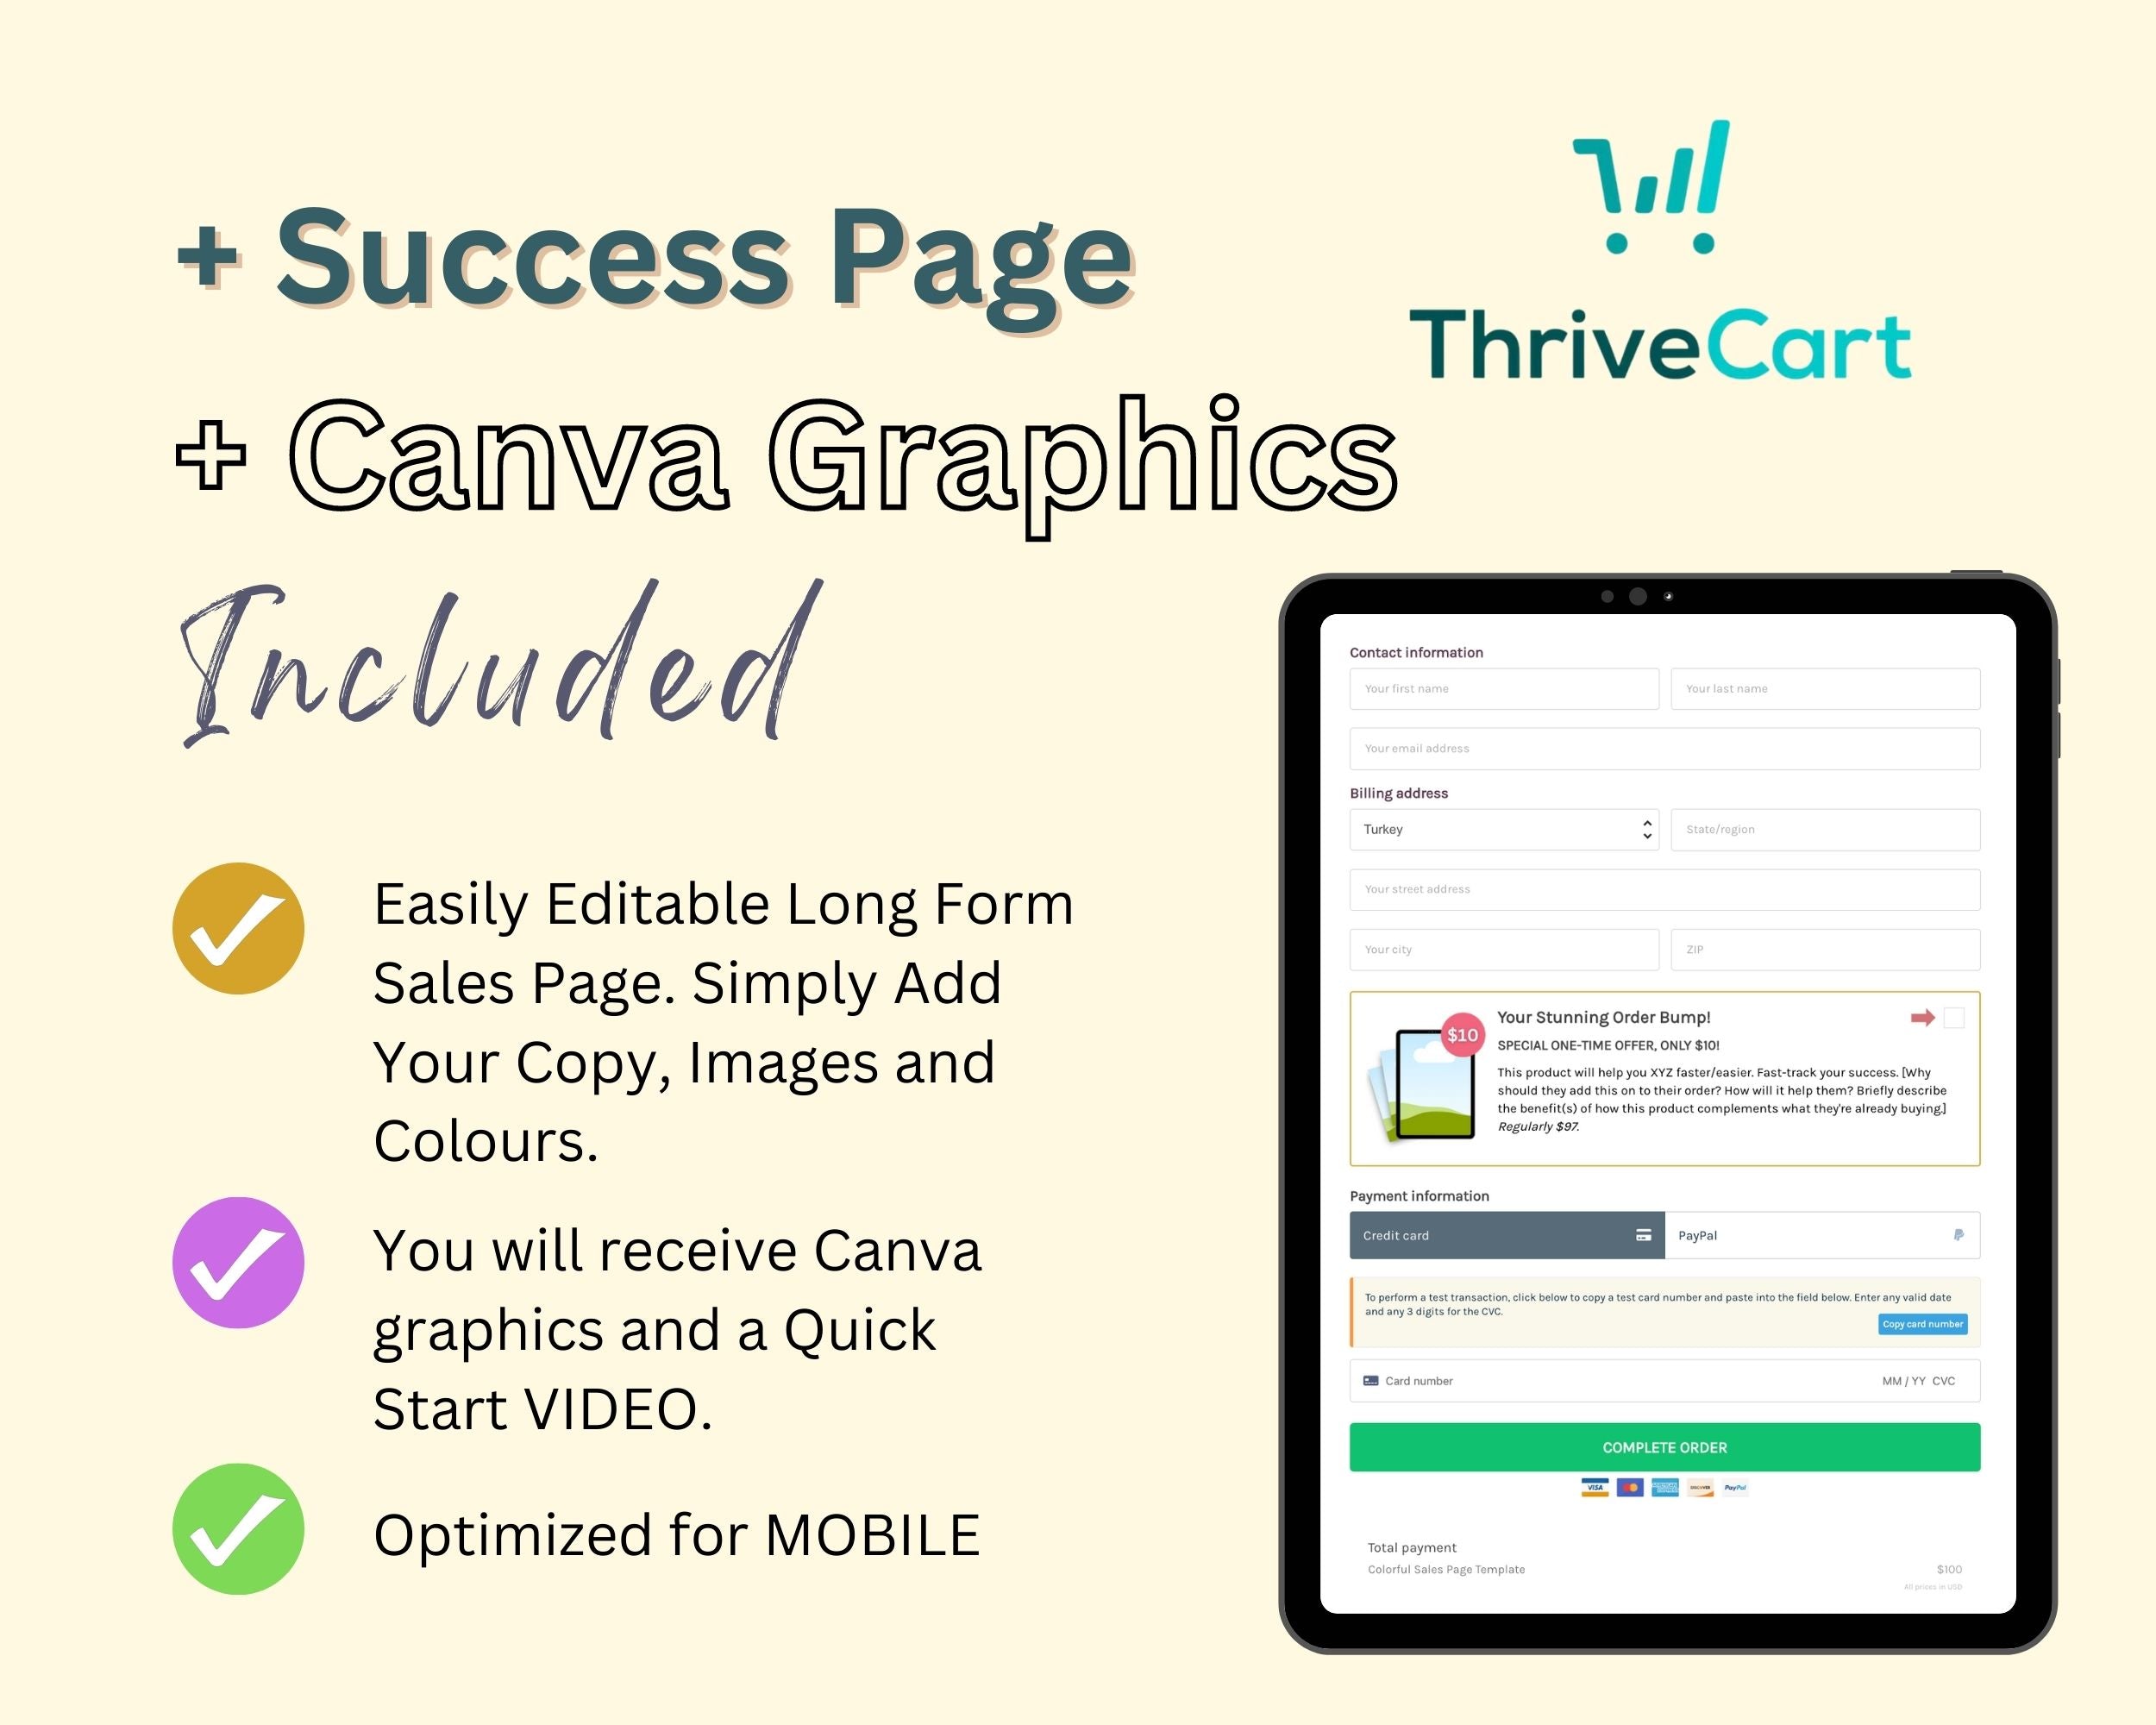 Colorful Sales Page Template in ThriveCart